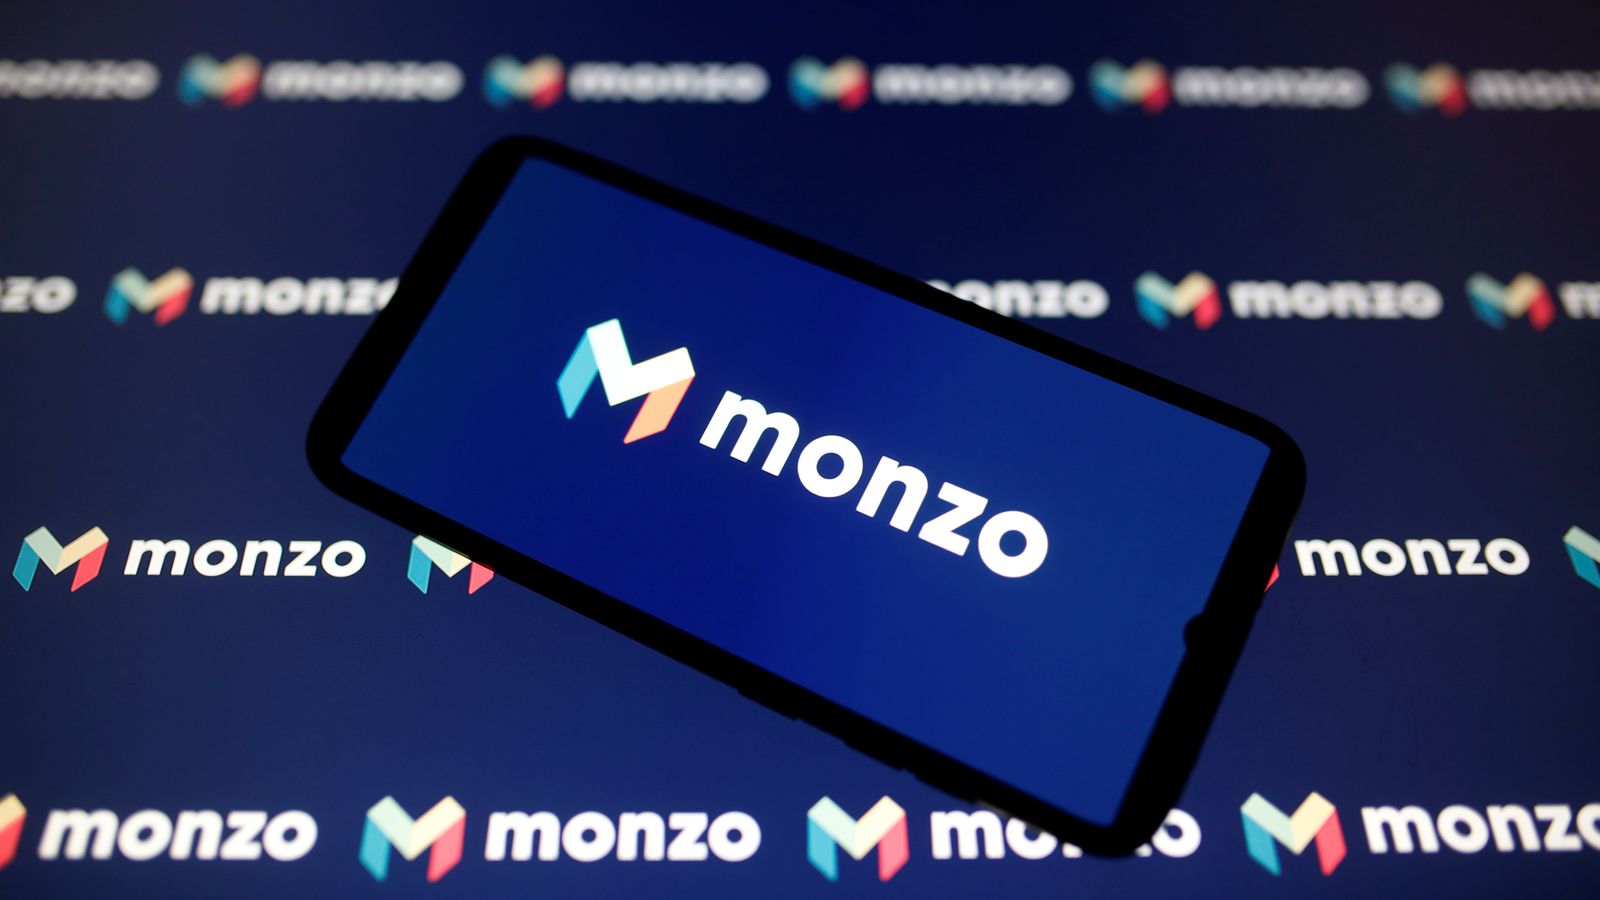 Digital bank Monzo in talks to sell new £300m stake